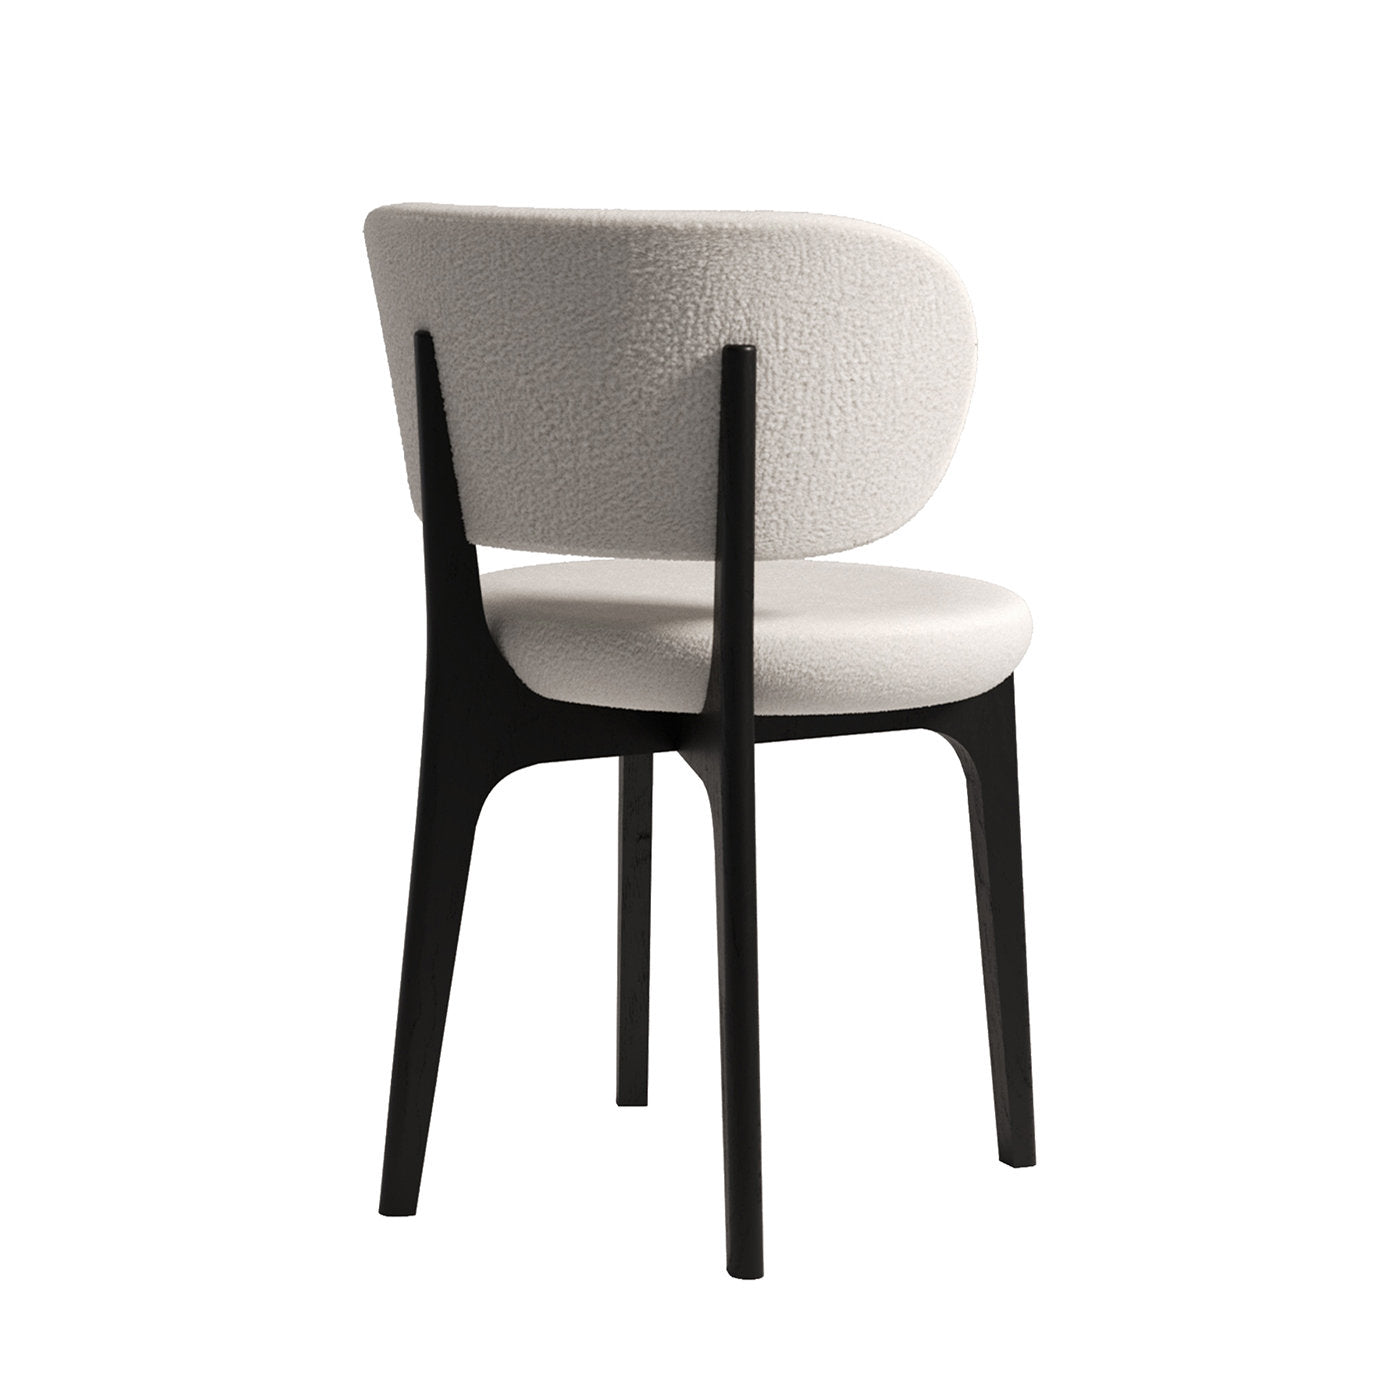 Richmond Black and White Dining Chair - Alternative view 1